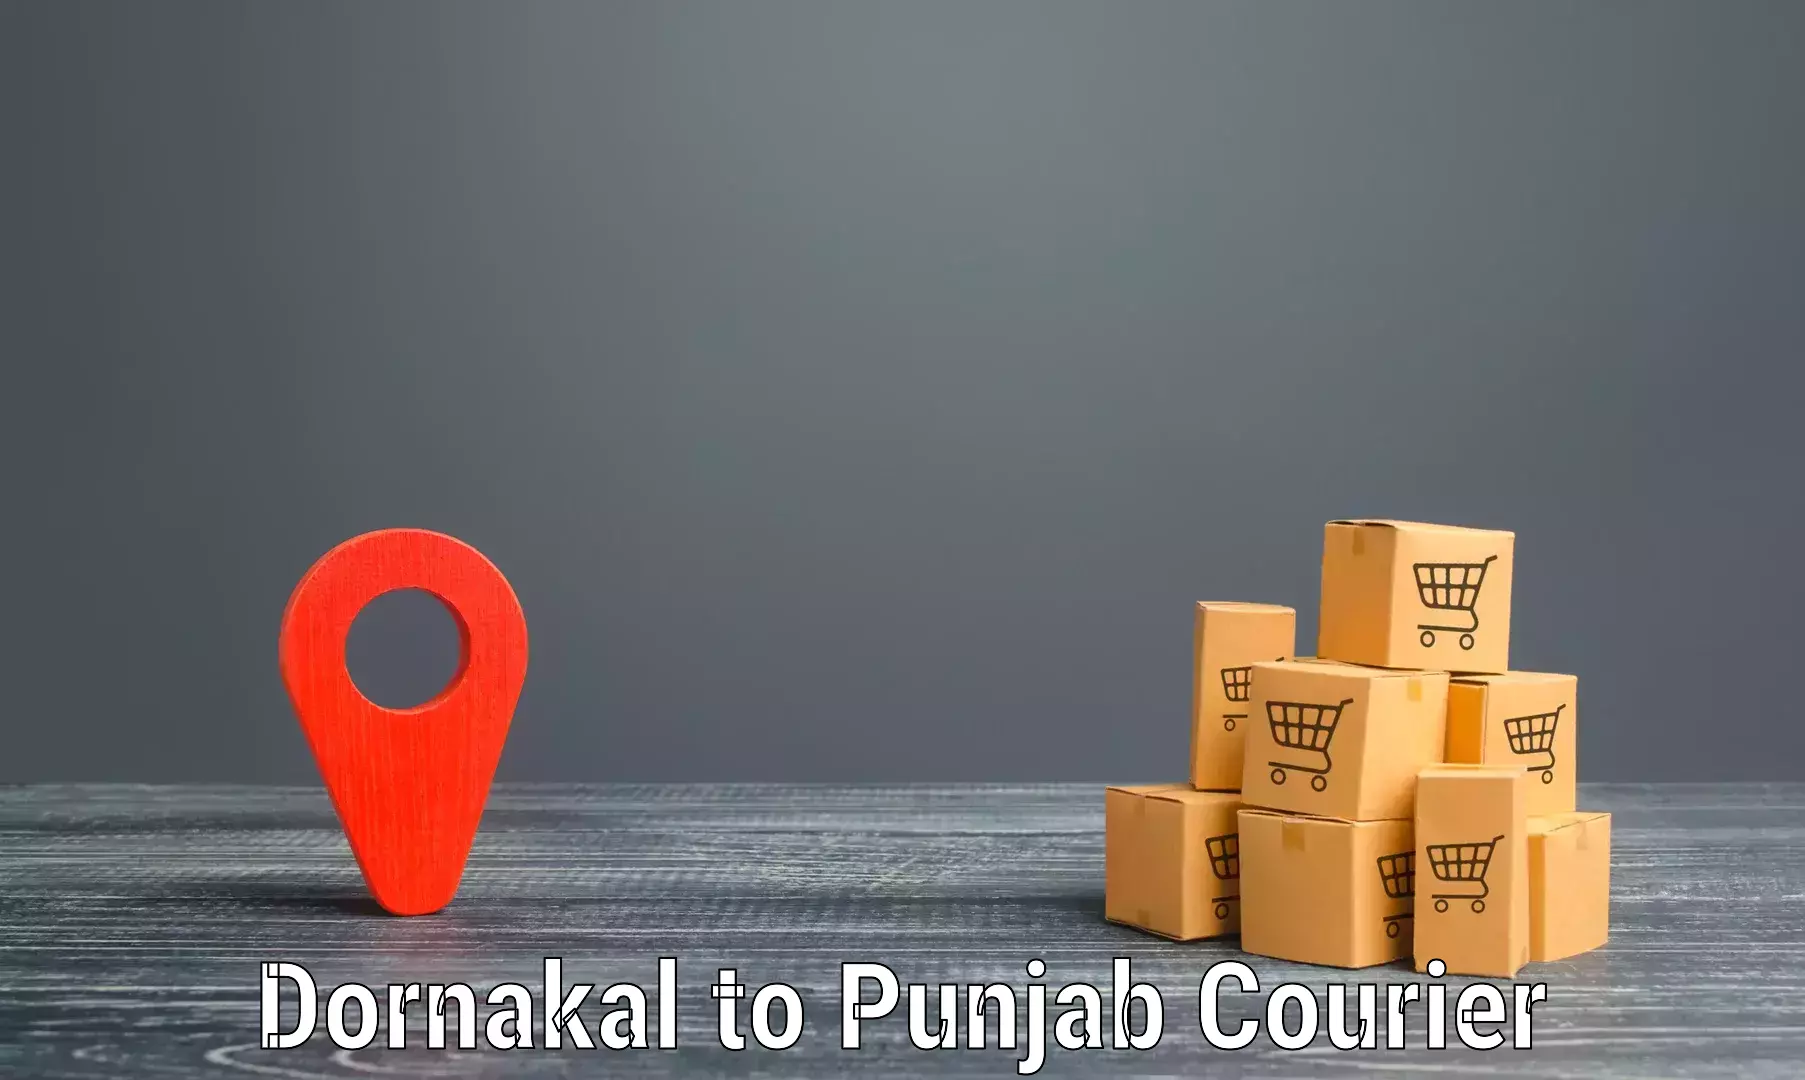 Innovative logistics solutions in Dornakal to Pathankot